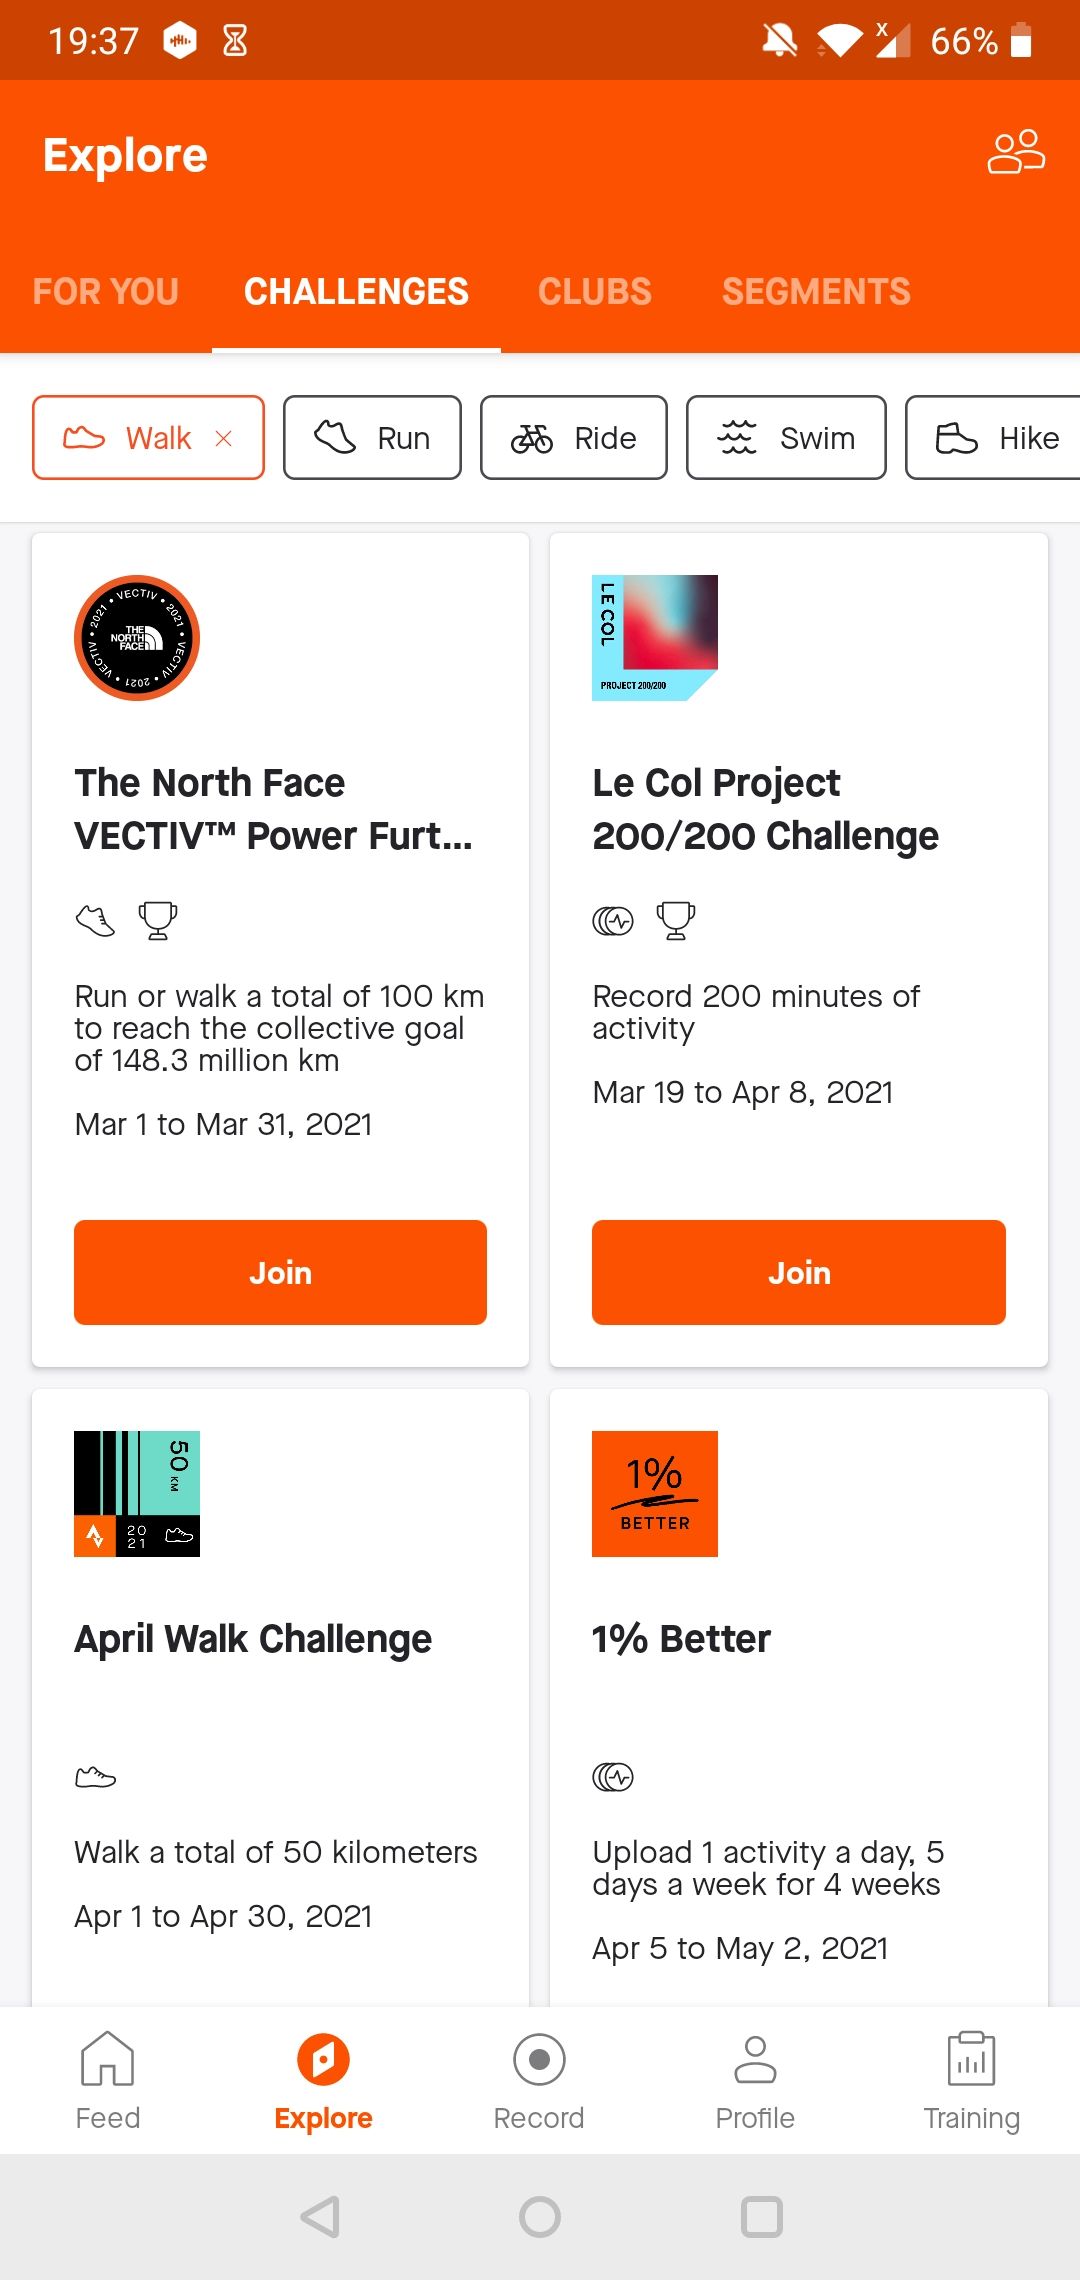 The "Explore" tab on the Strava Android app on the "Challenges" section.